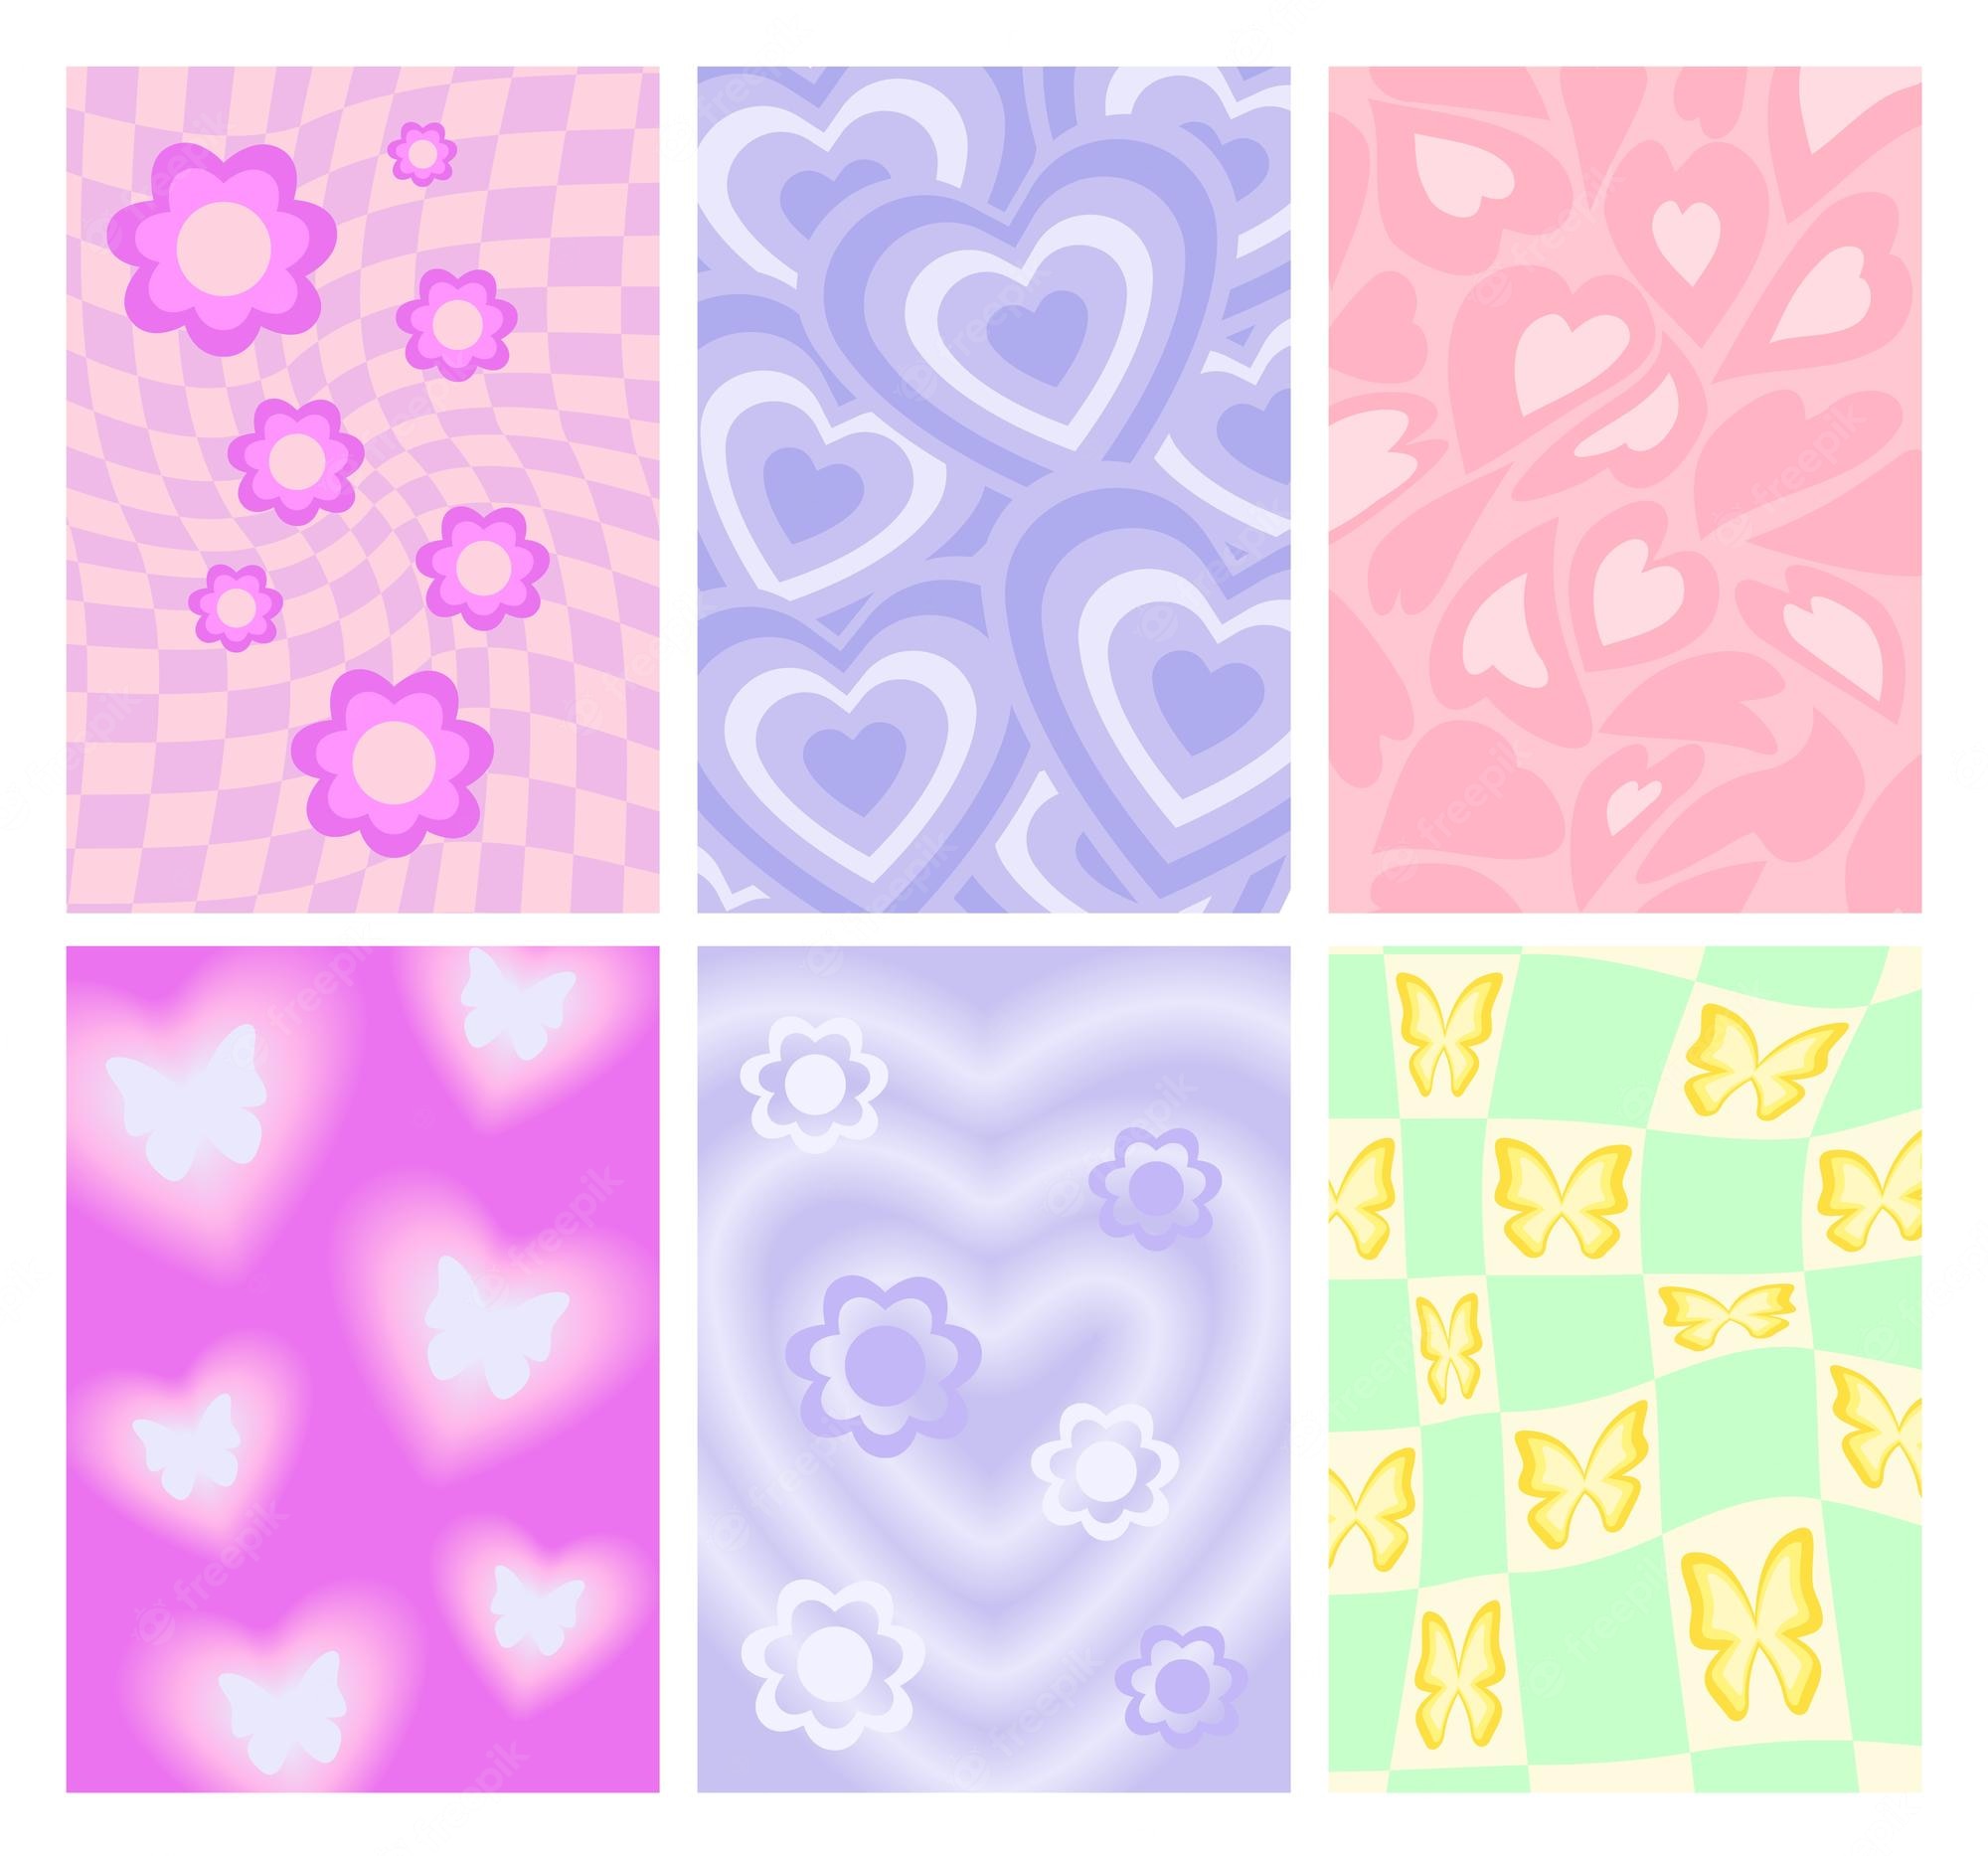 Aesthetic Hearts Wallpapers